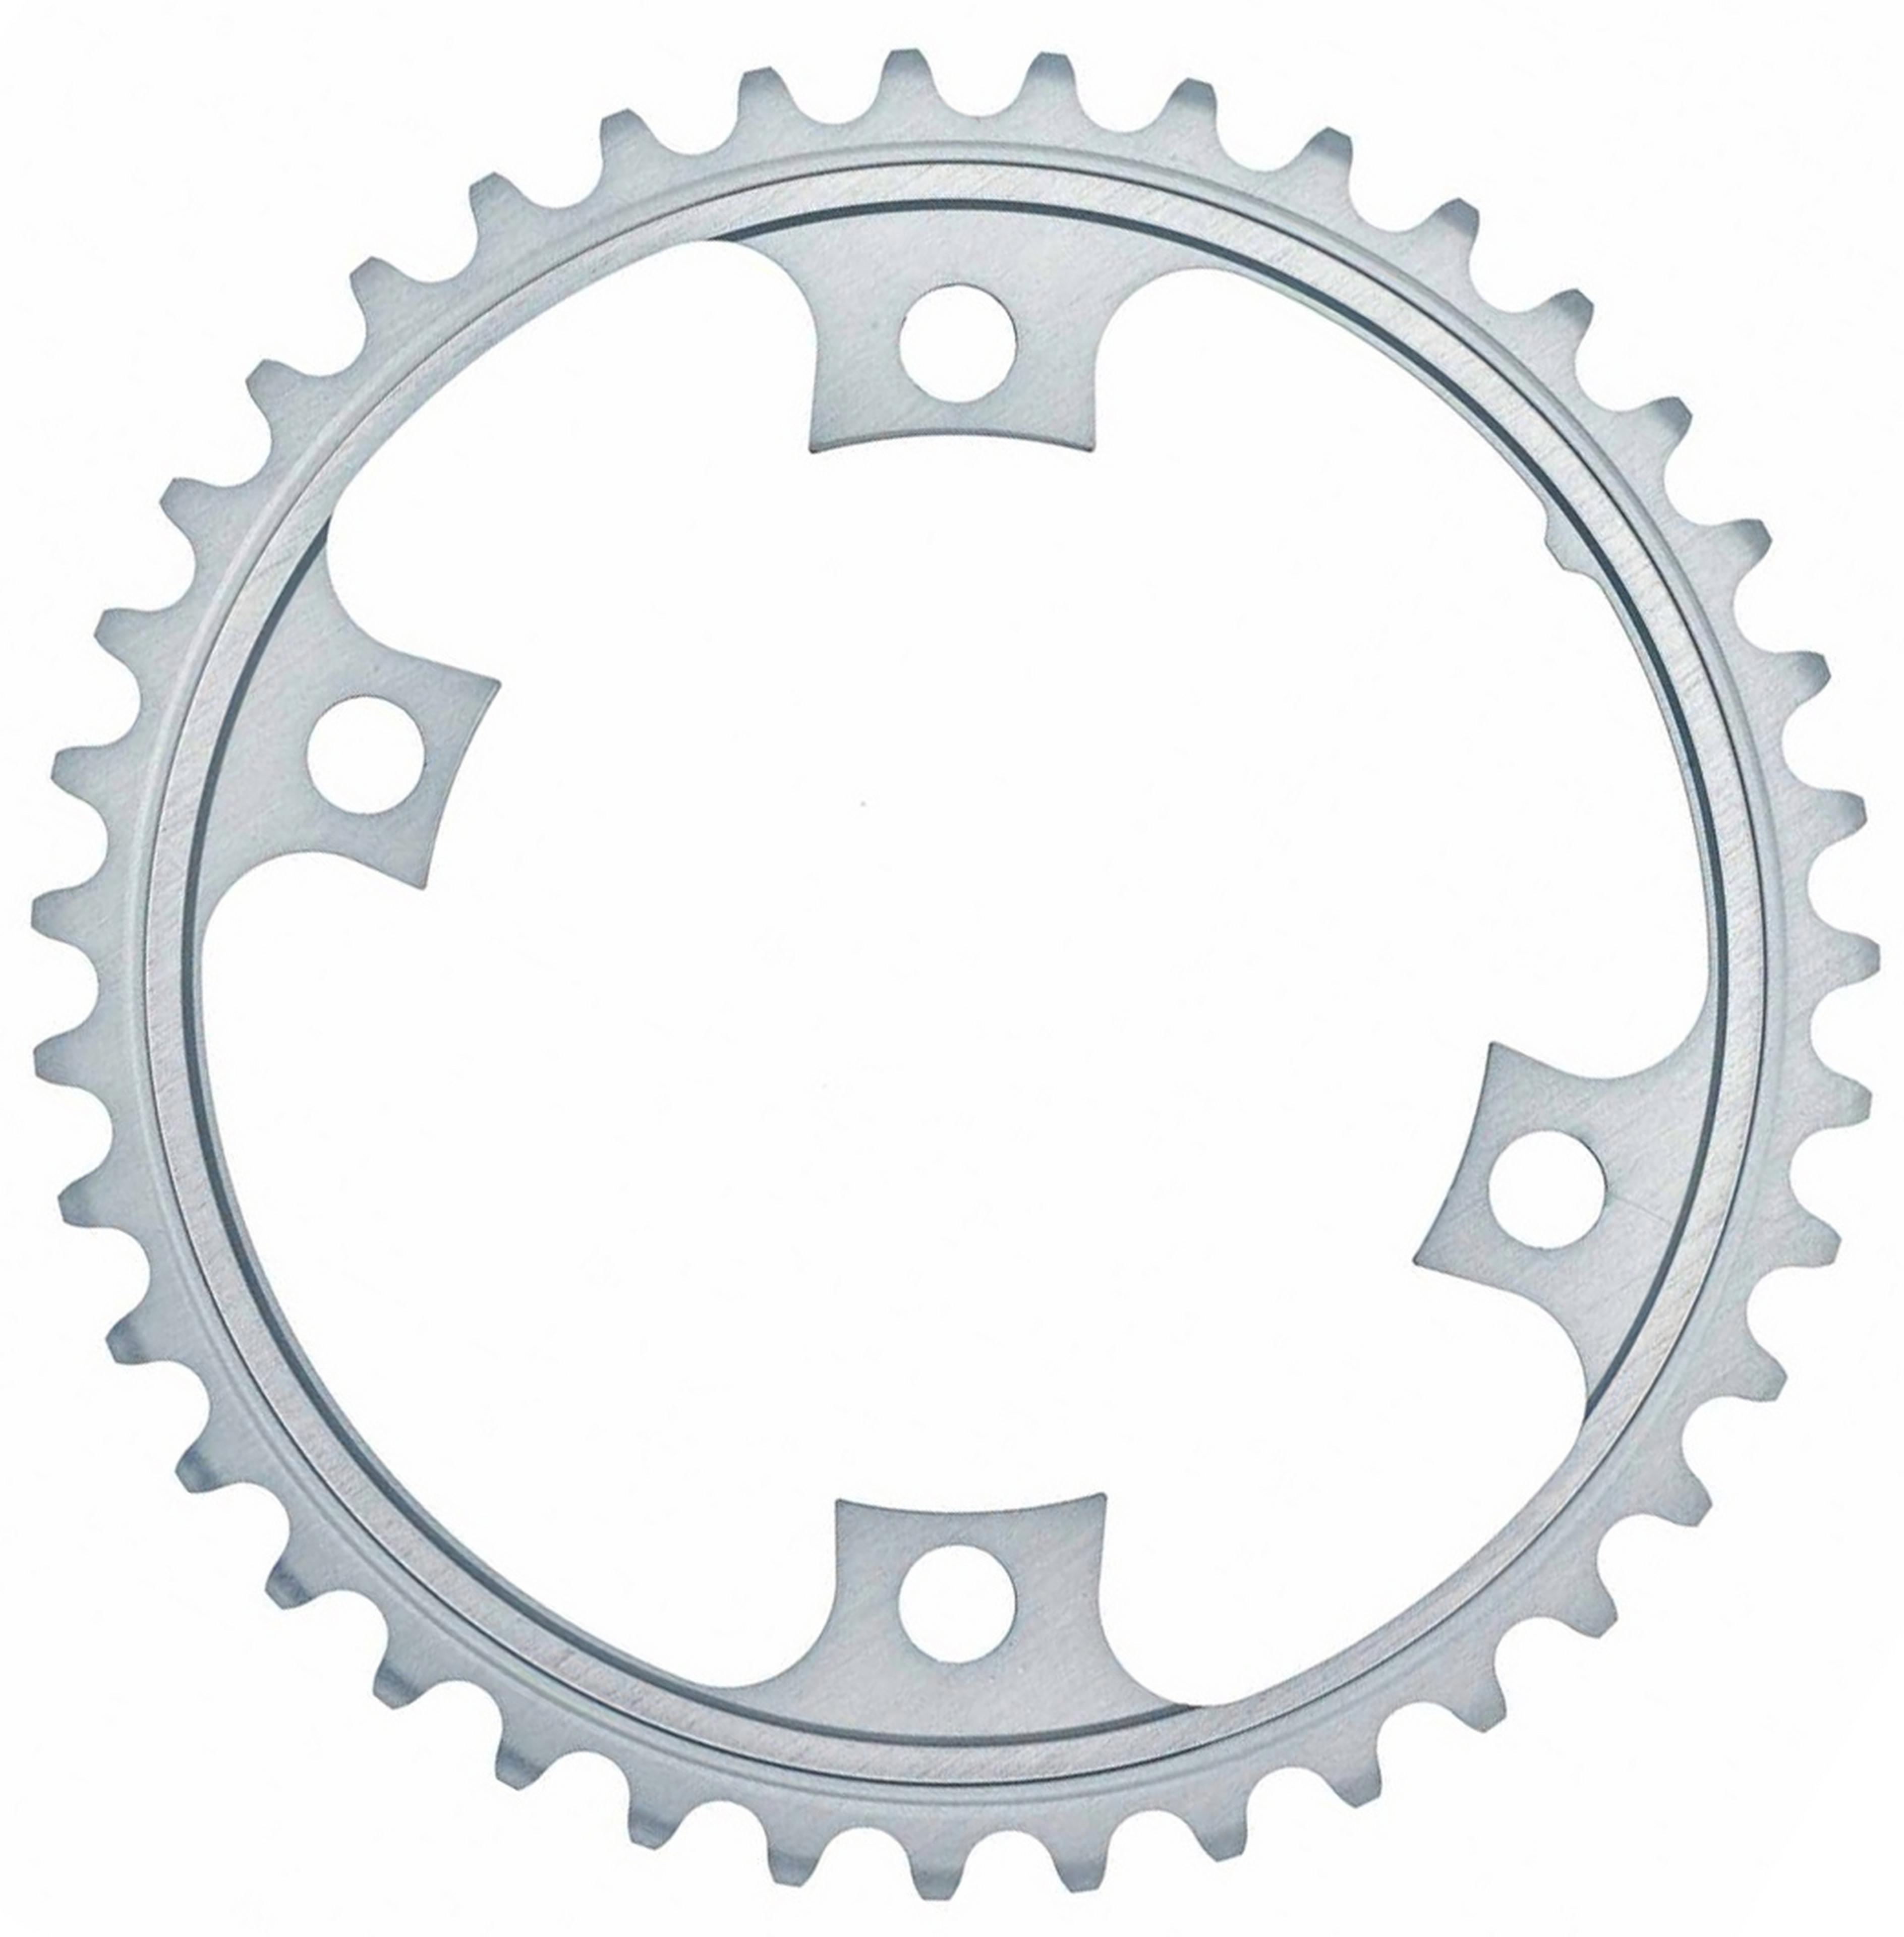 Shimano 105 5800 11 Speed Chainring | Wiggle